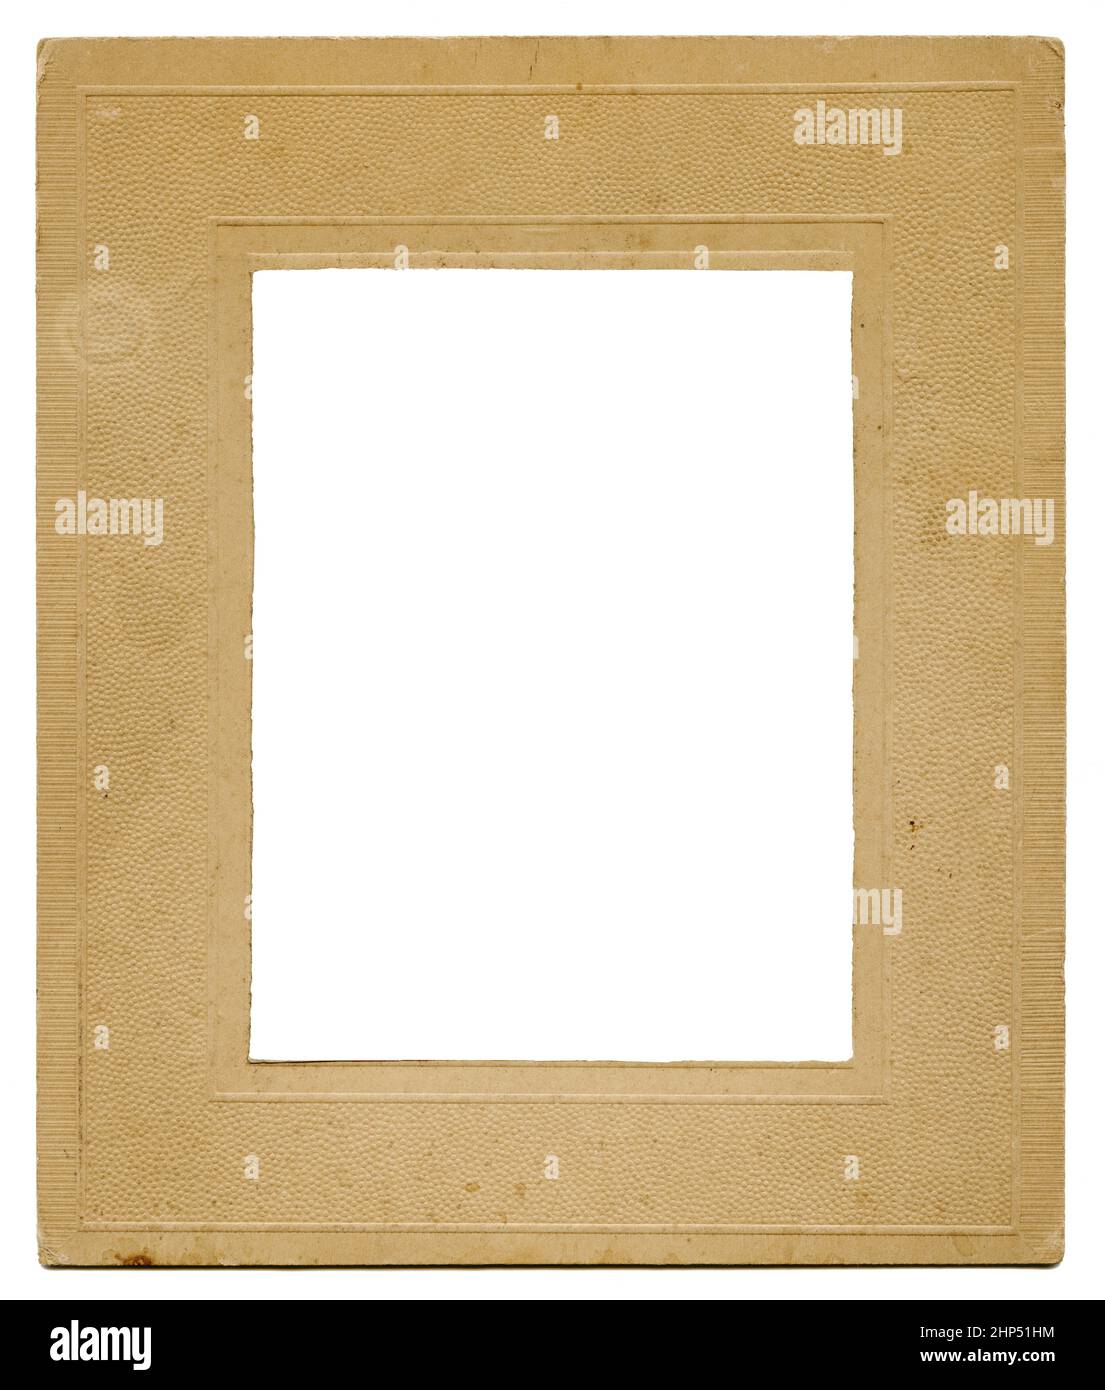 Old cardboard photo frame template isolated on white background. Mock up Stock Photo